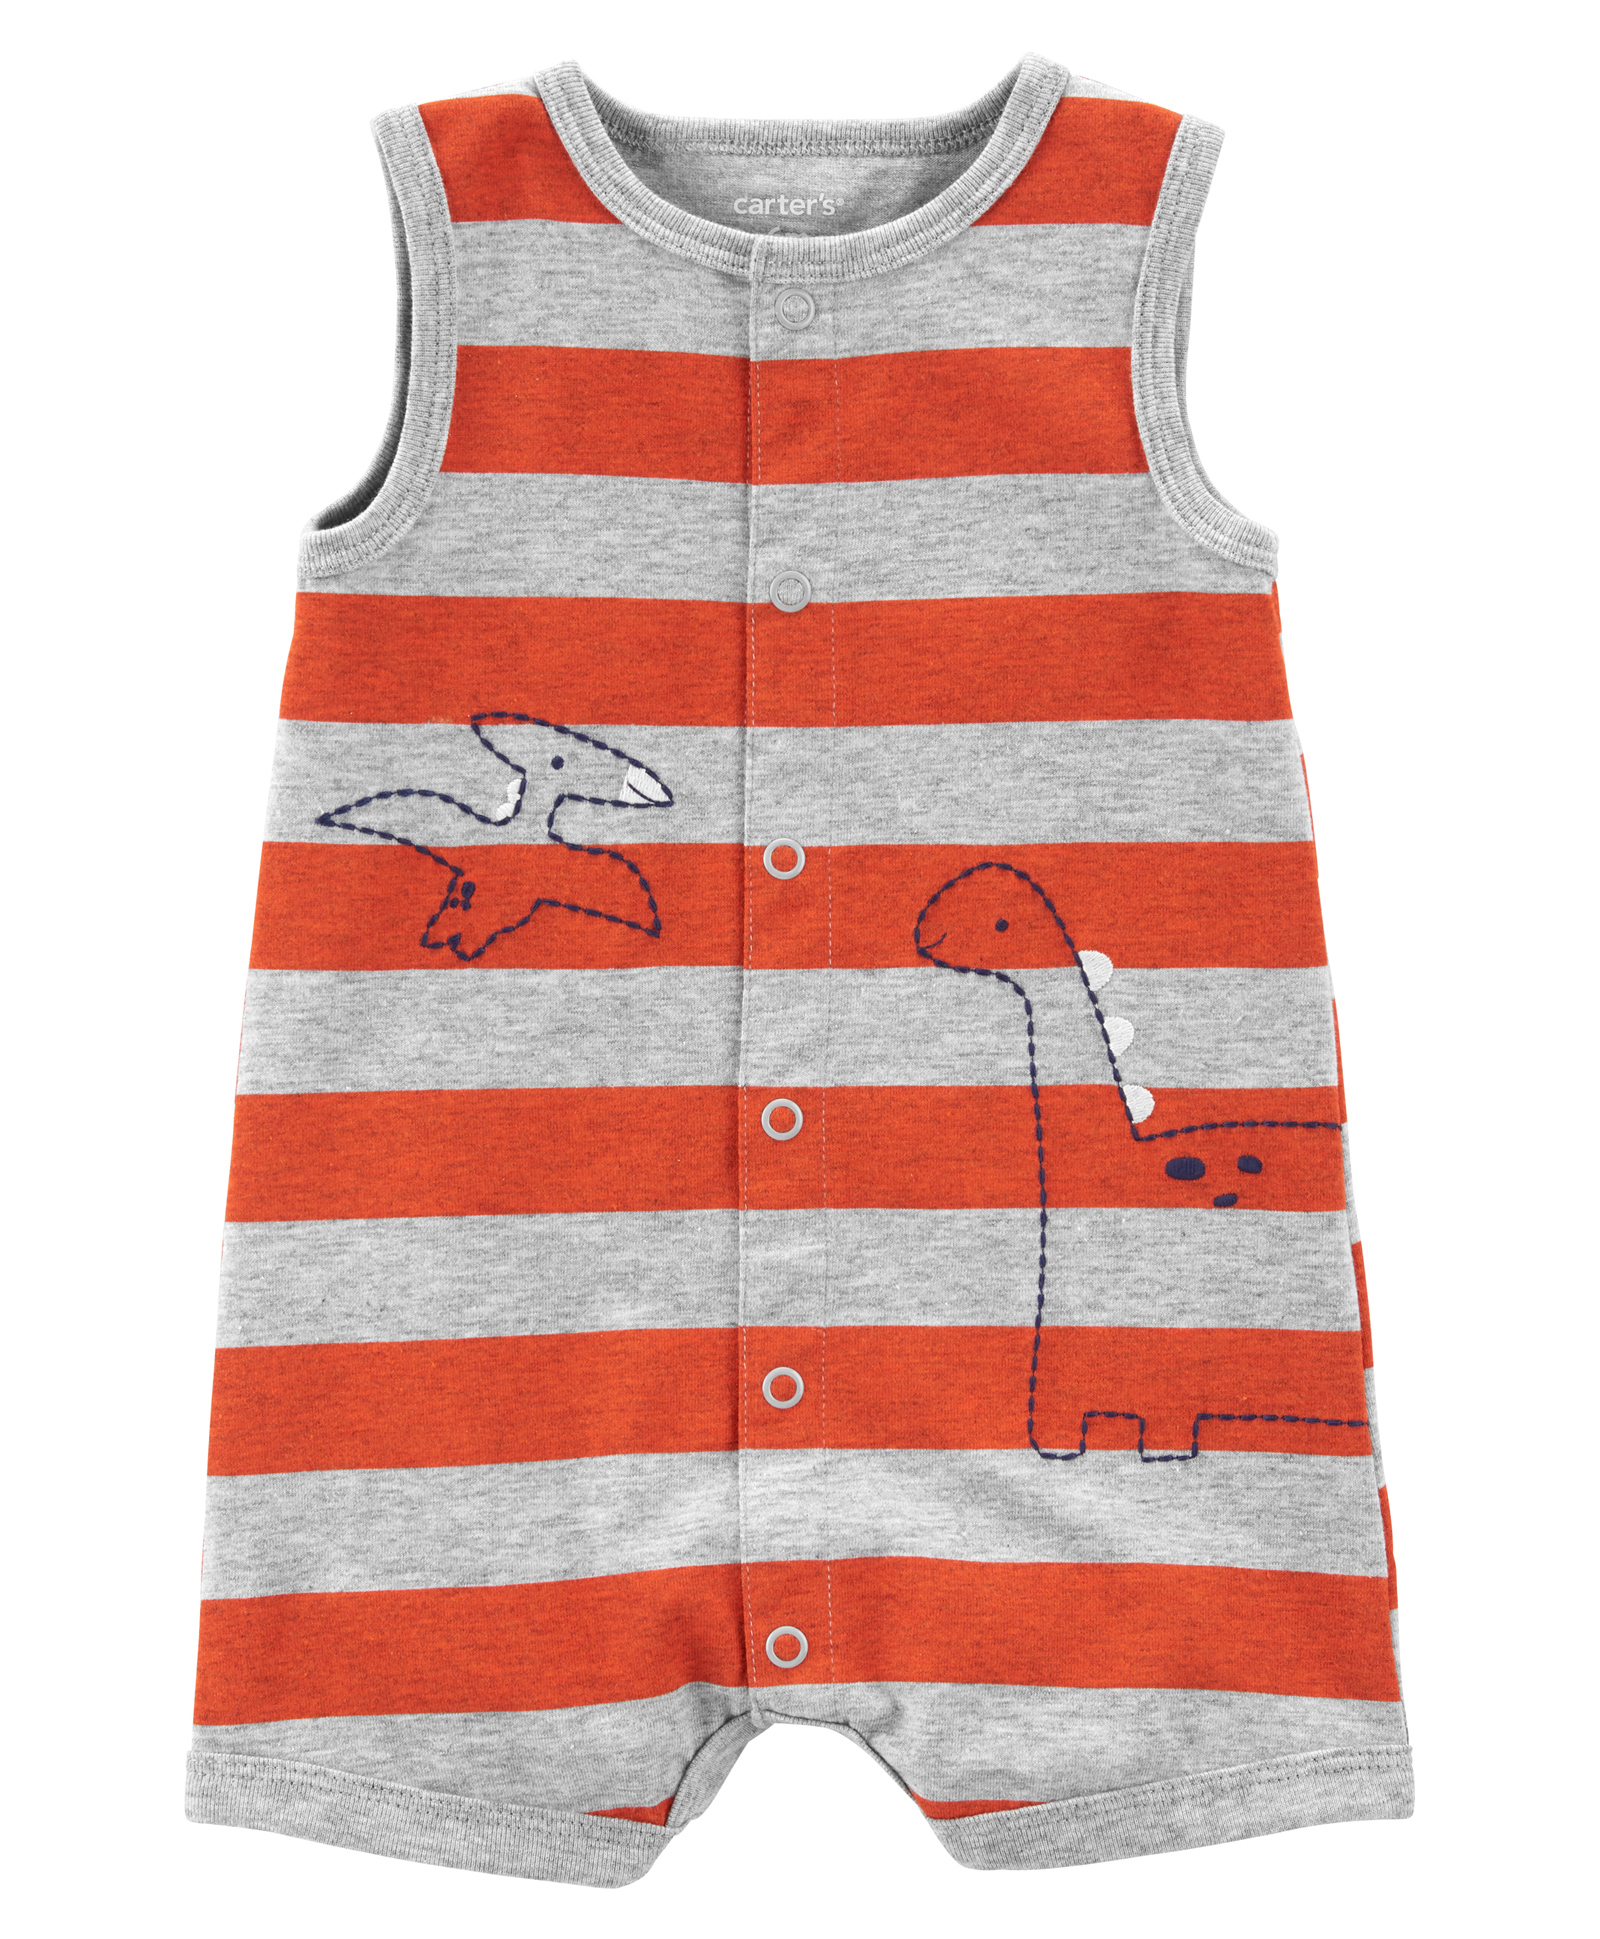 NWT Carter's Dinosaur Snap-Up Romper Short One Piece Baby Girl 